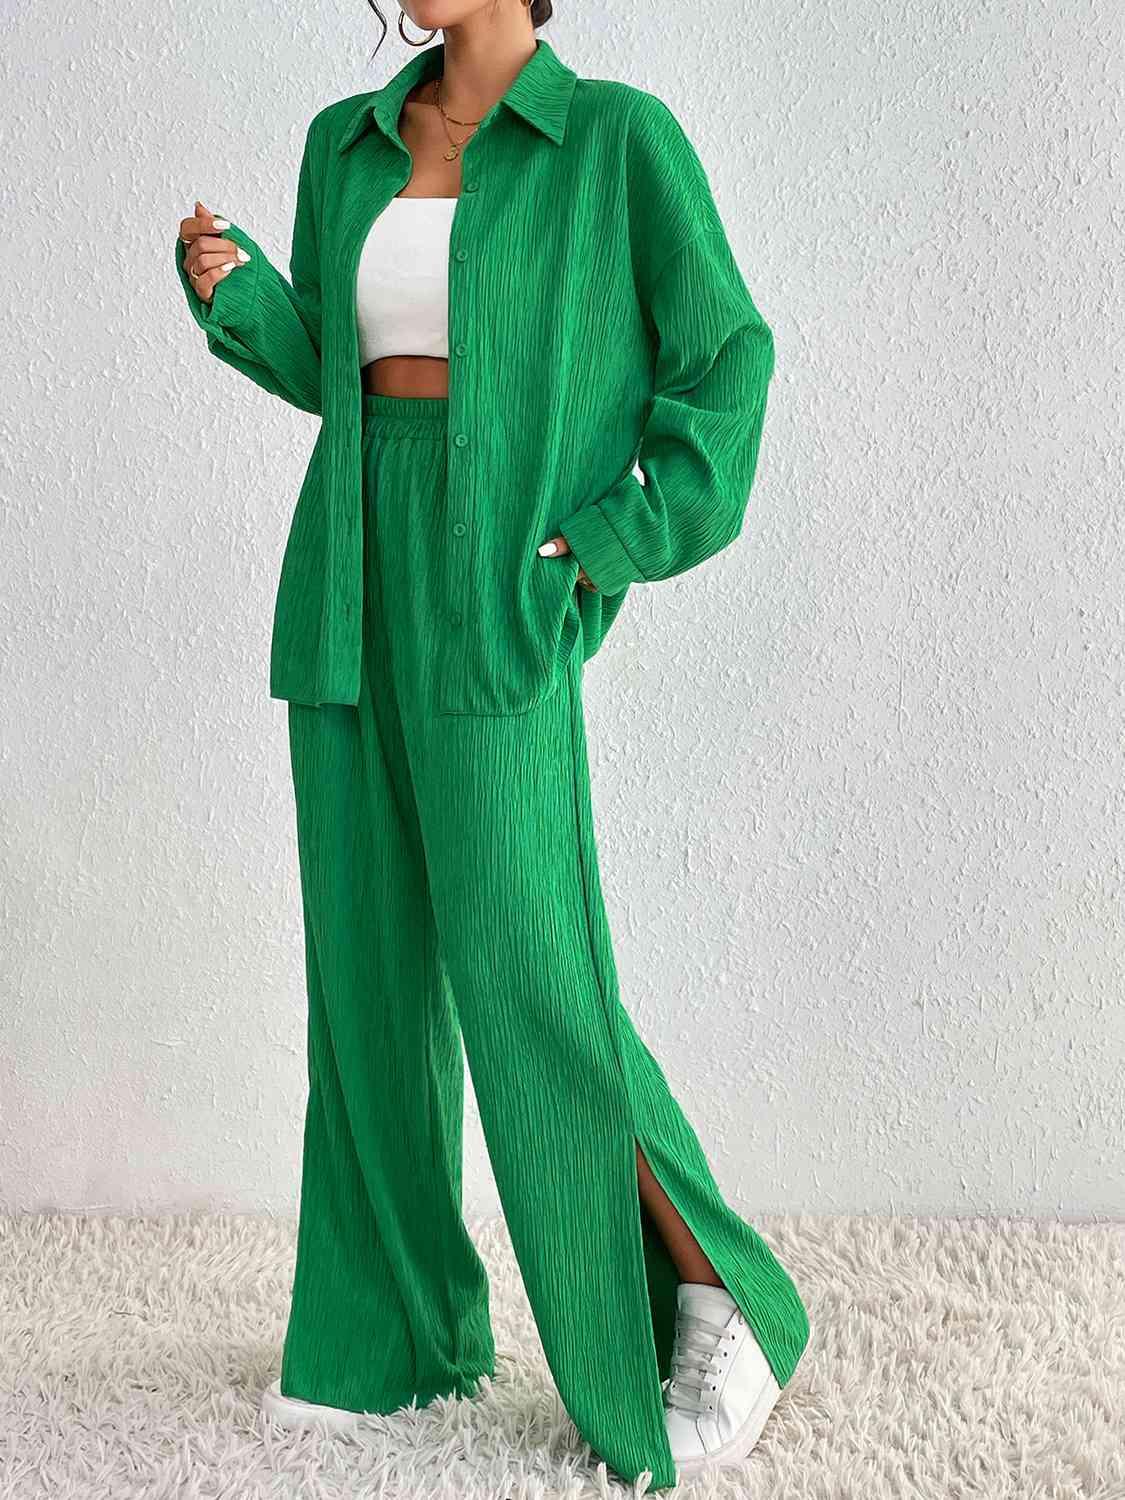 a woman wearing a green suit and white top